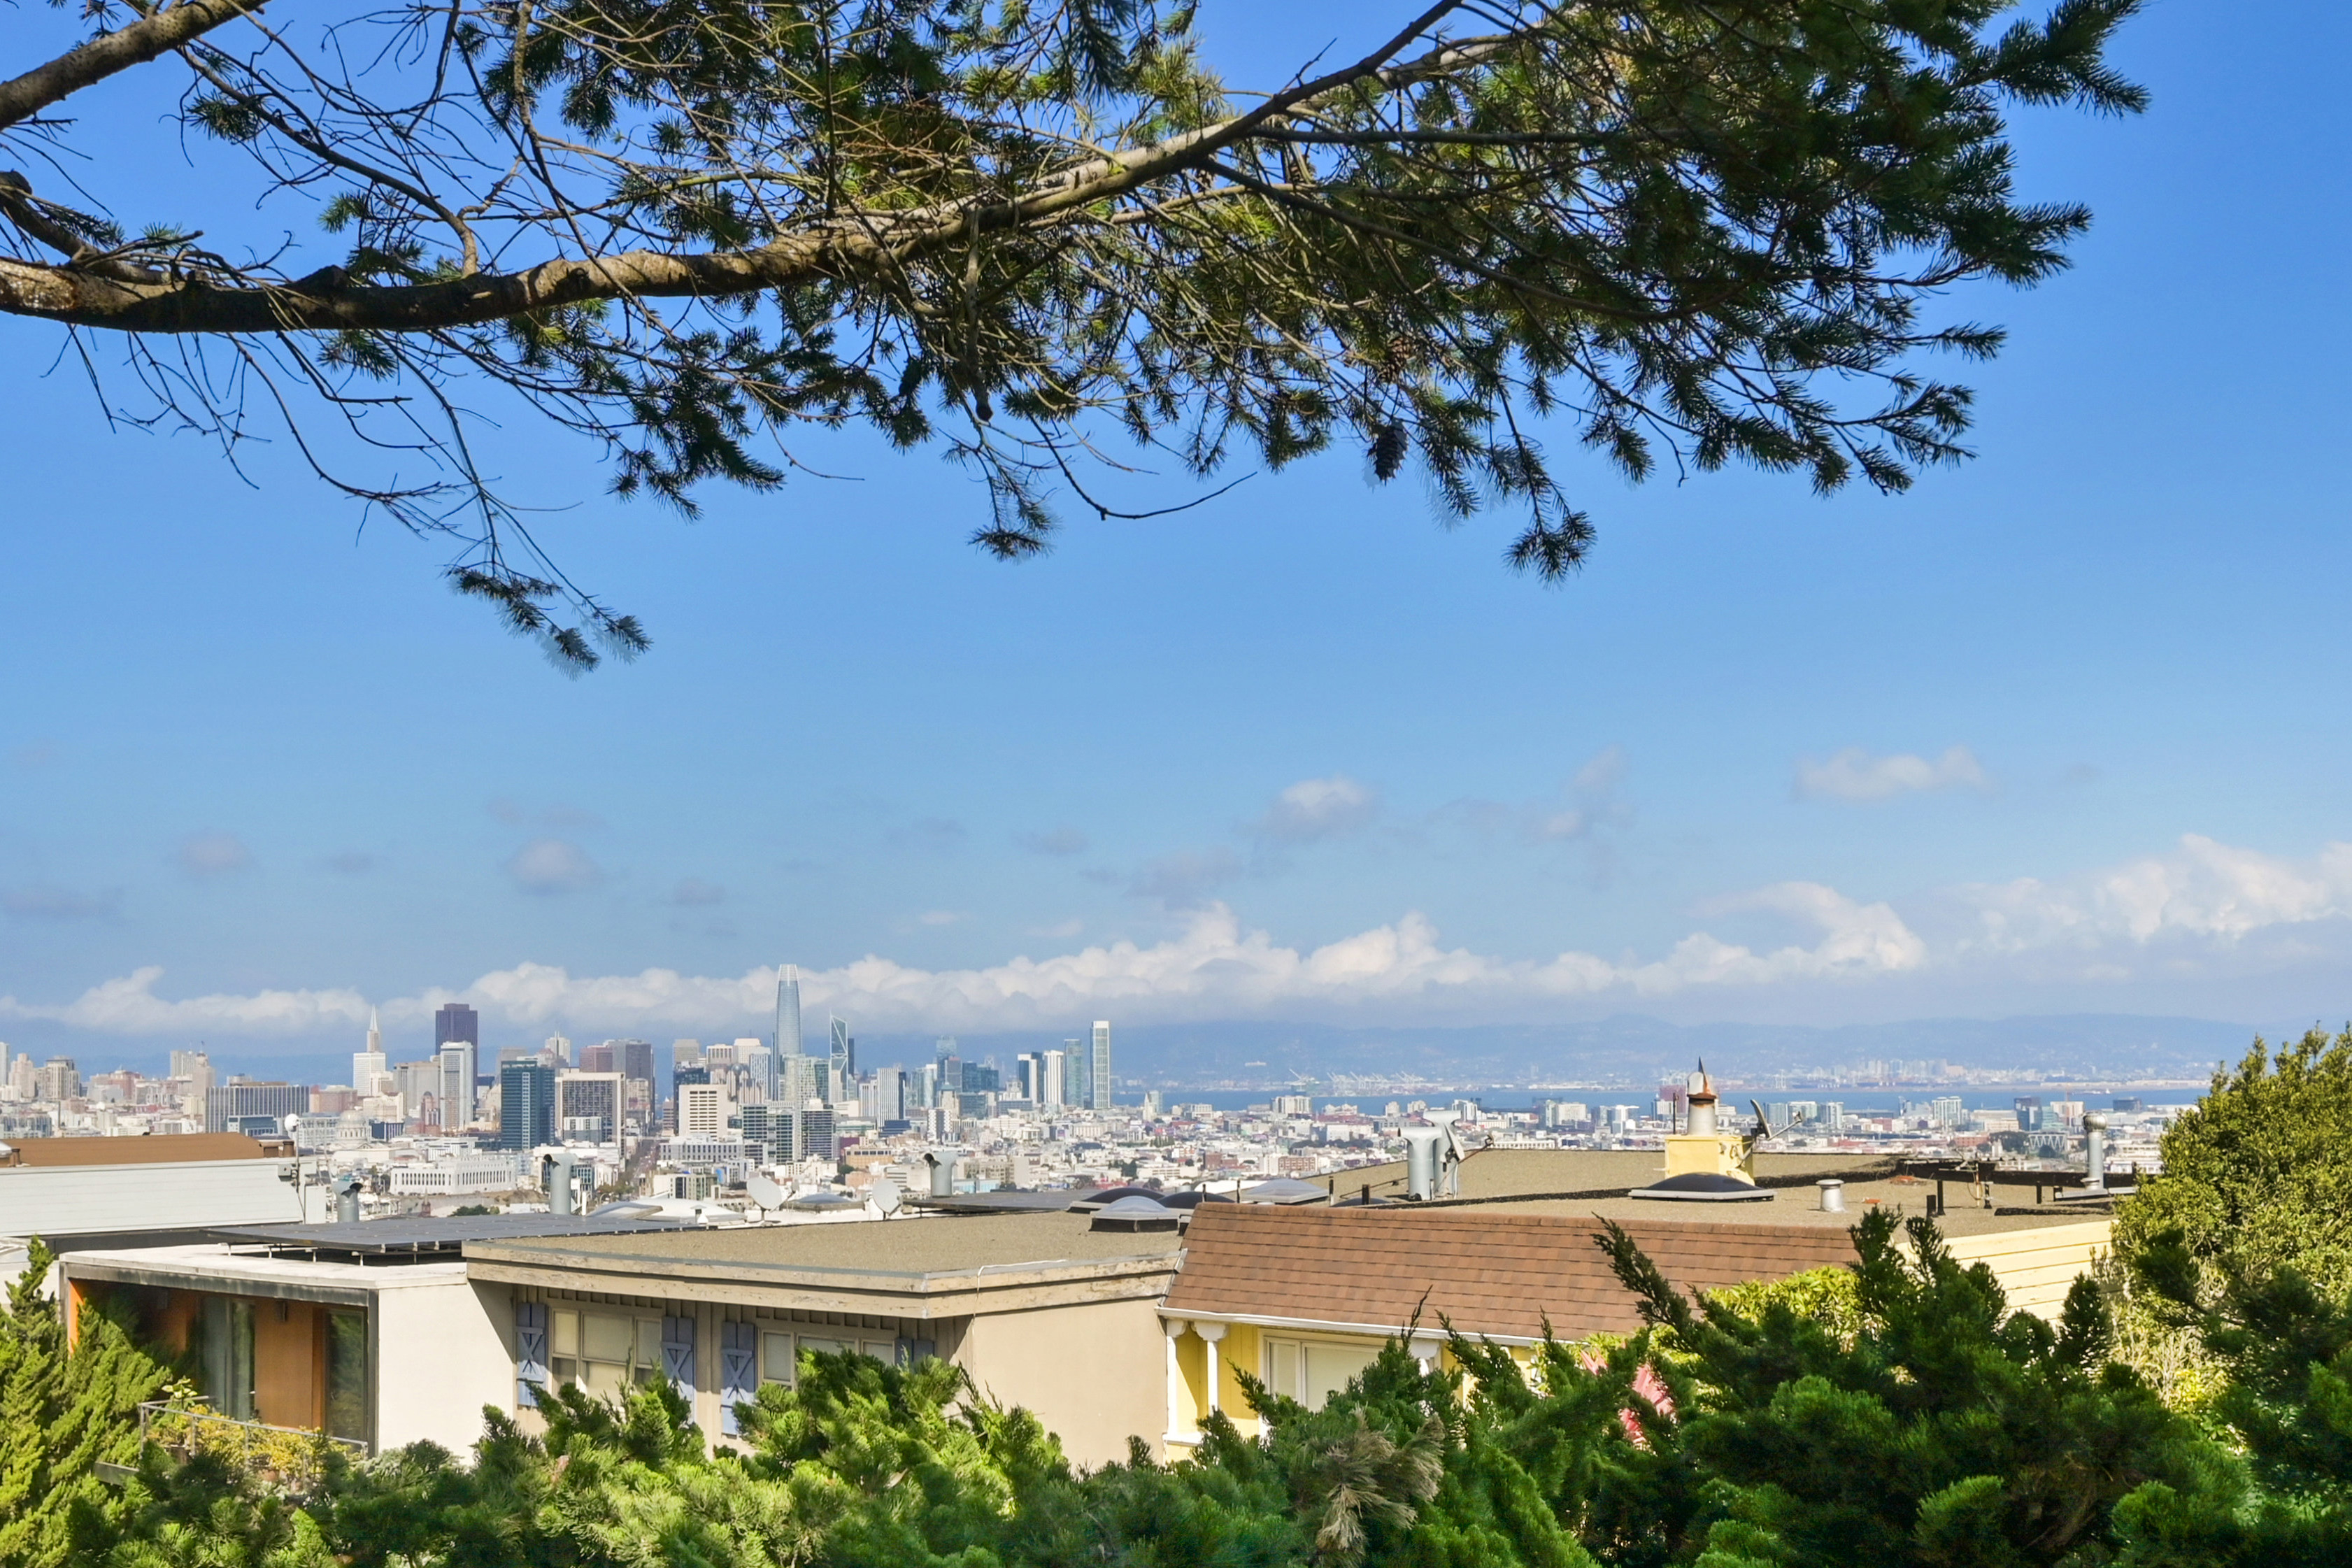 Property Photo: Aerial view of San Francisco as seen from 25 Grand View Ave, presented by John DiDomenico